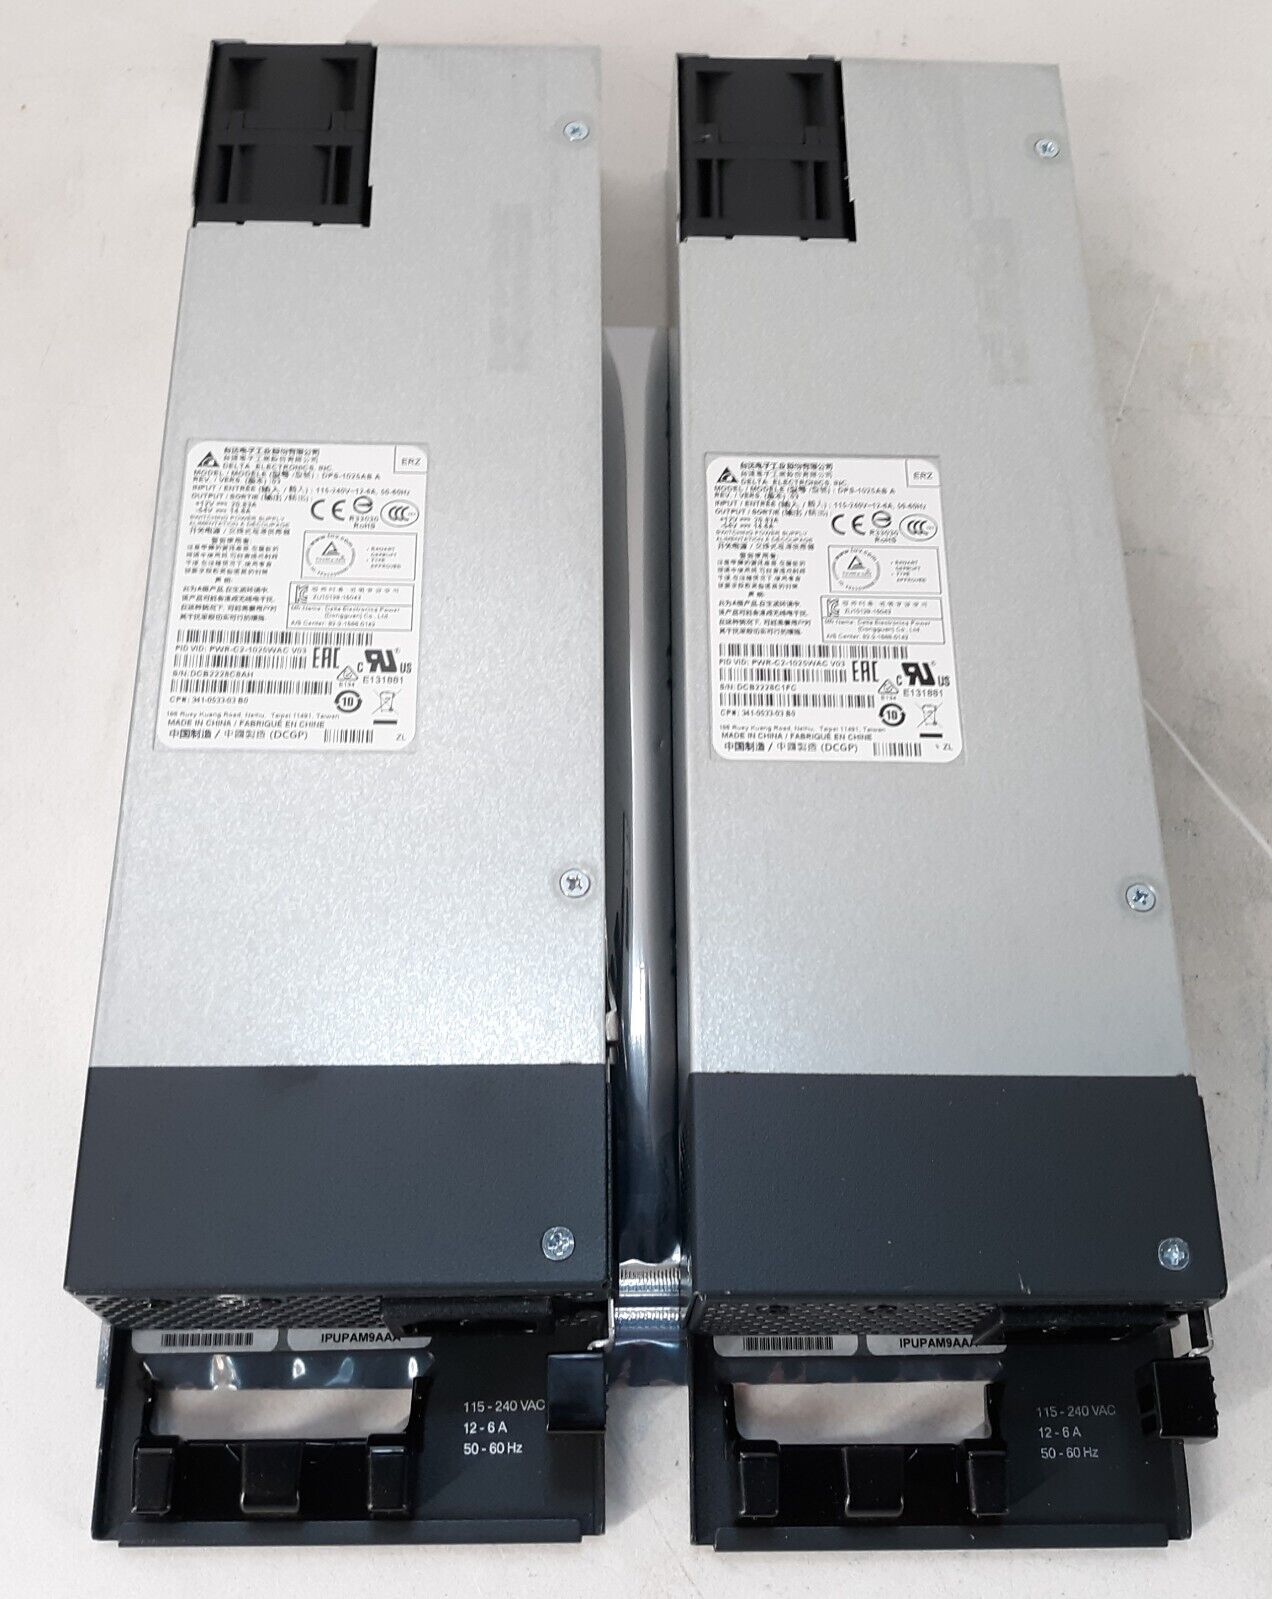 Pair of Delta PWR-C2-1025WAC V03 DPS-1025AB A 1025WAC Switching Power Supply